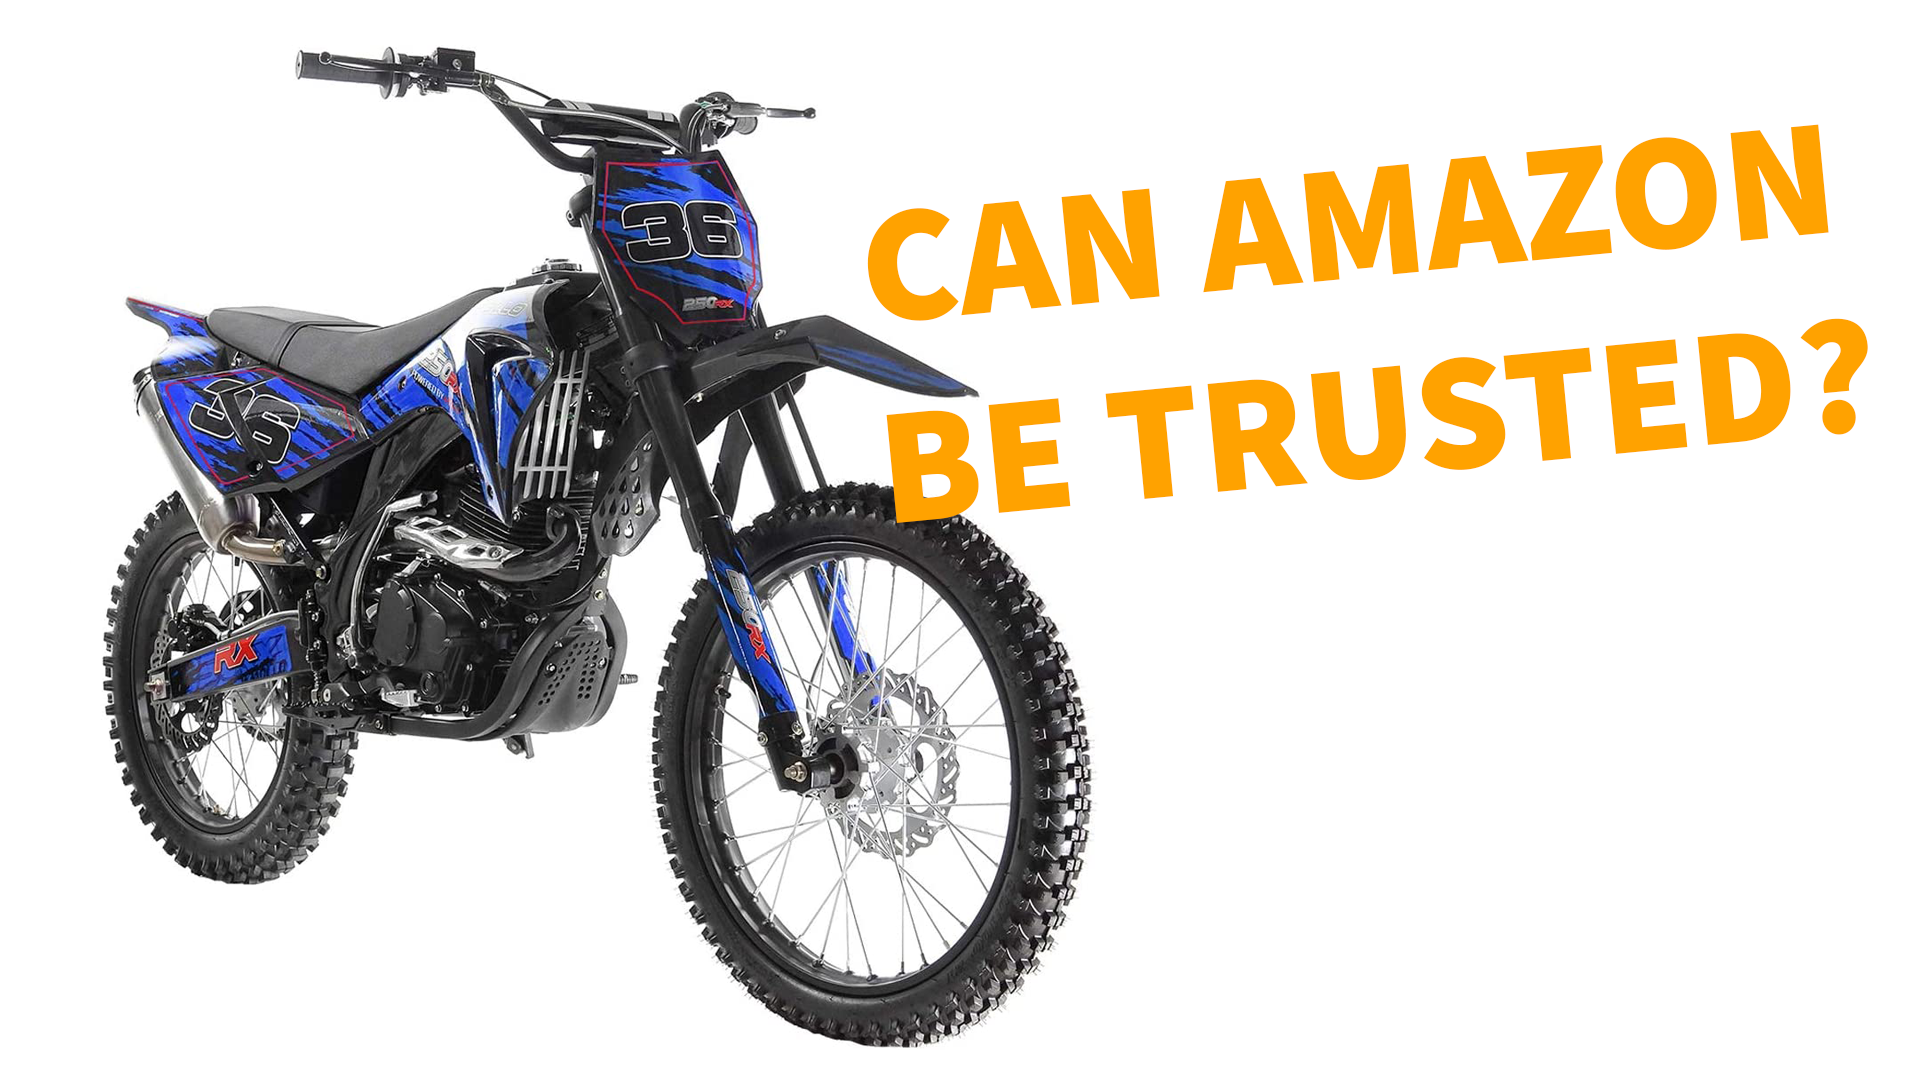 Did You Know Amazon Sells Cheap Dirt Bikes? The Drive